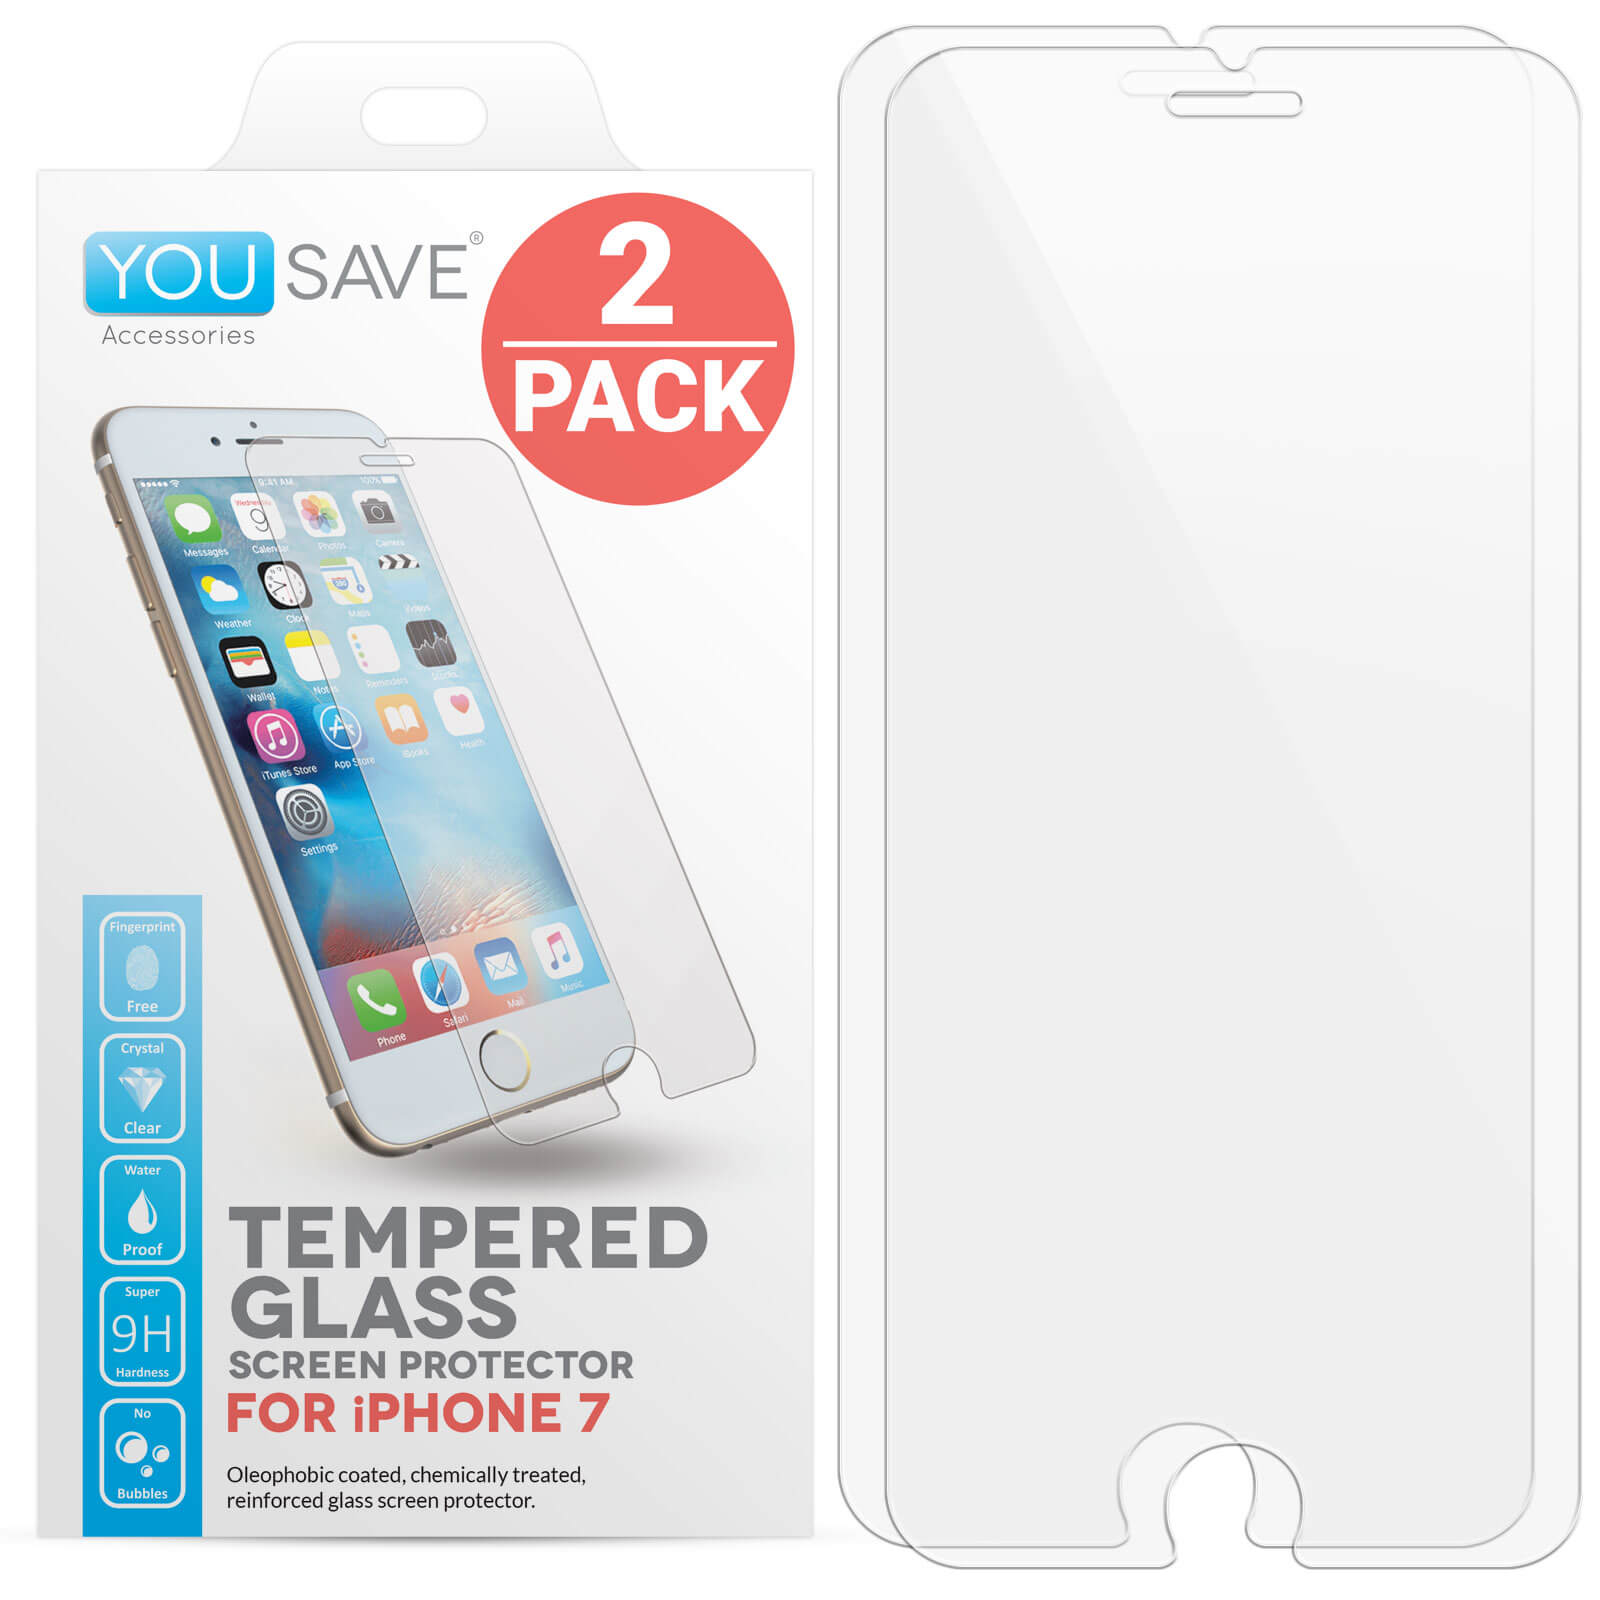 Yousave Accessories iPhone 7 Glass Screen Protector - Twin Pack